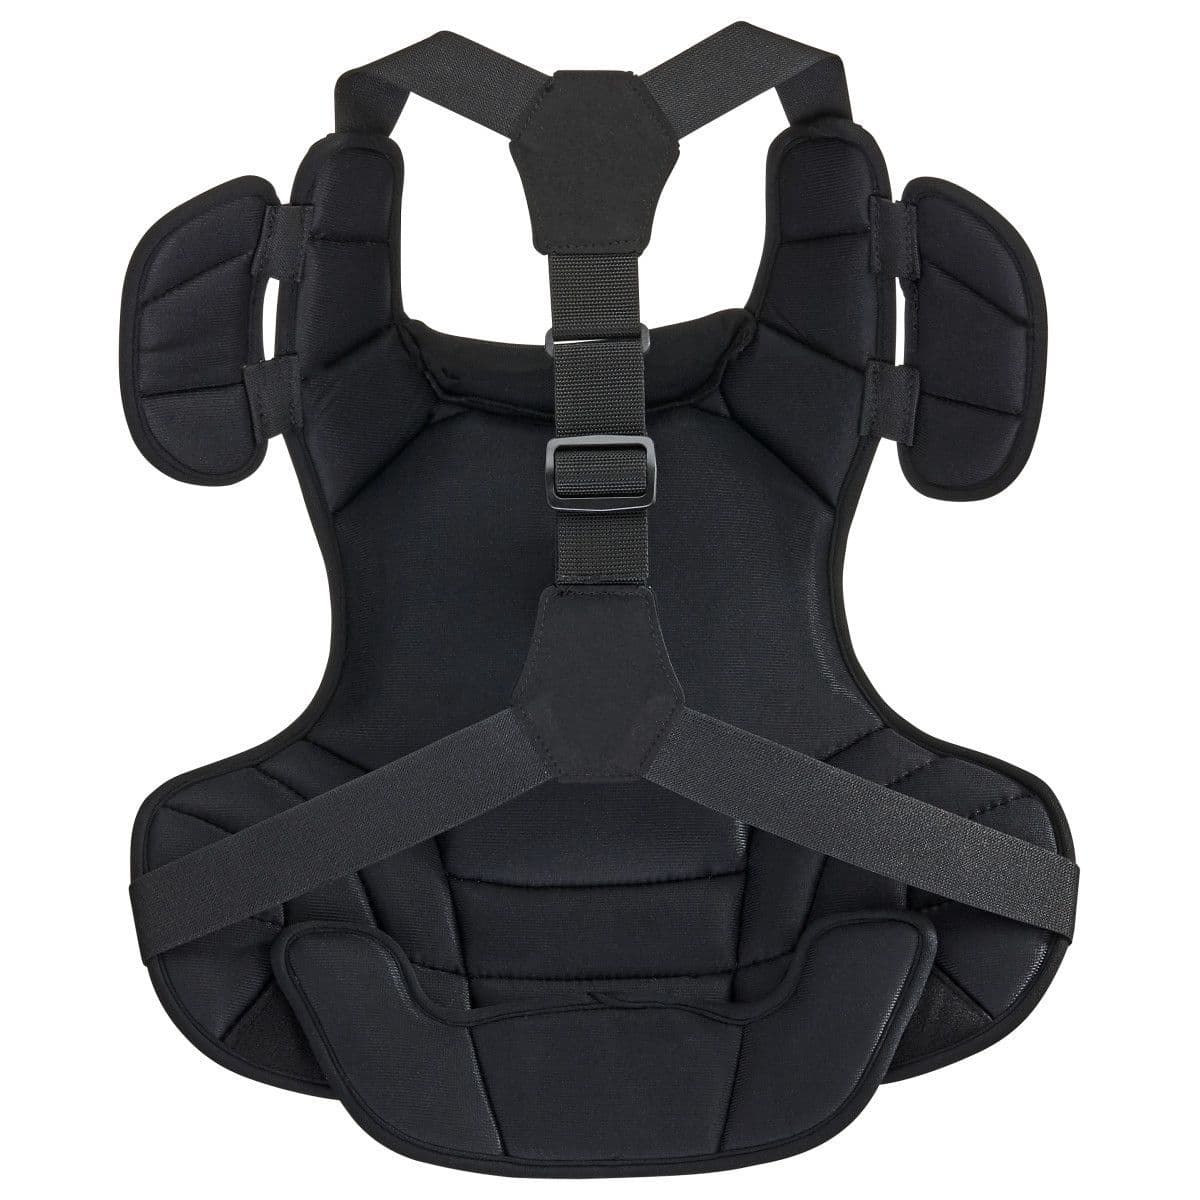 The STX Shield 200 lacrosse goalie chest protector